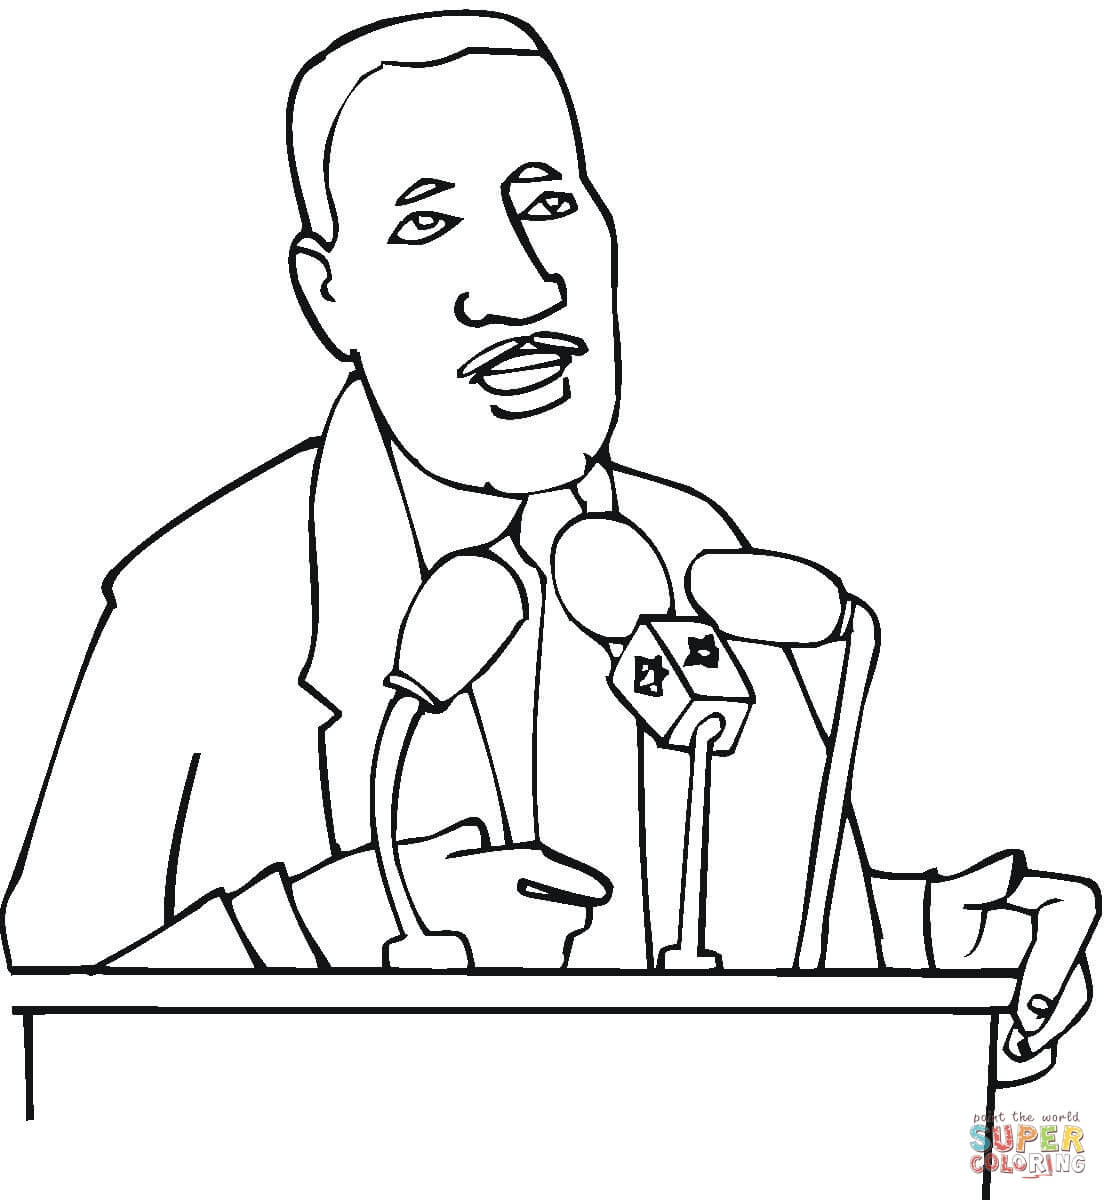 Martin Luther King Jr. Coloring Page | Free Printable intérieur Martin Luther King Coloring Pages